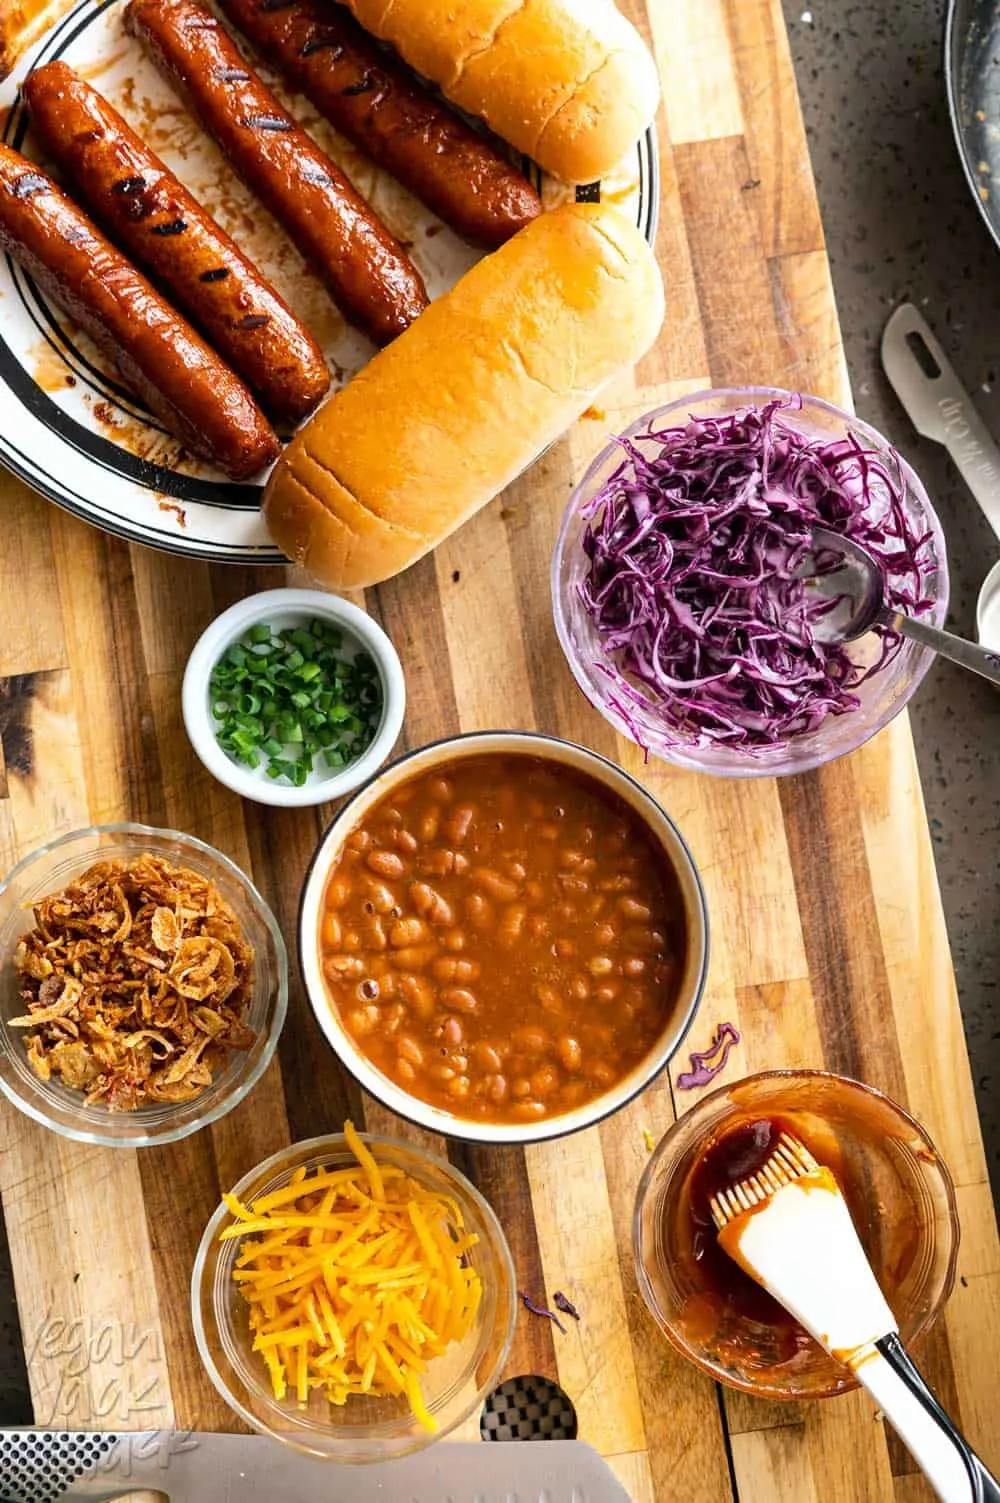 Beans, slaw, hot dogs, and other toppings on a cutting board